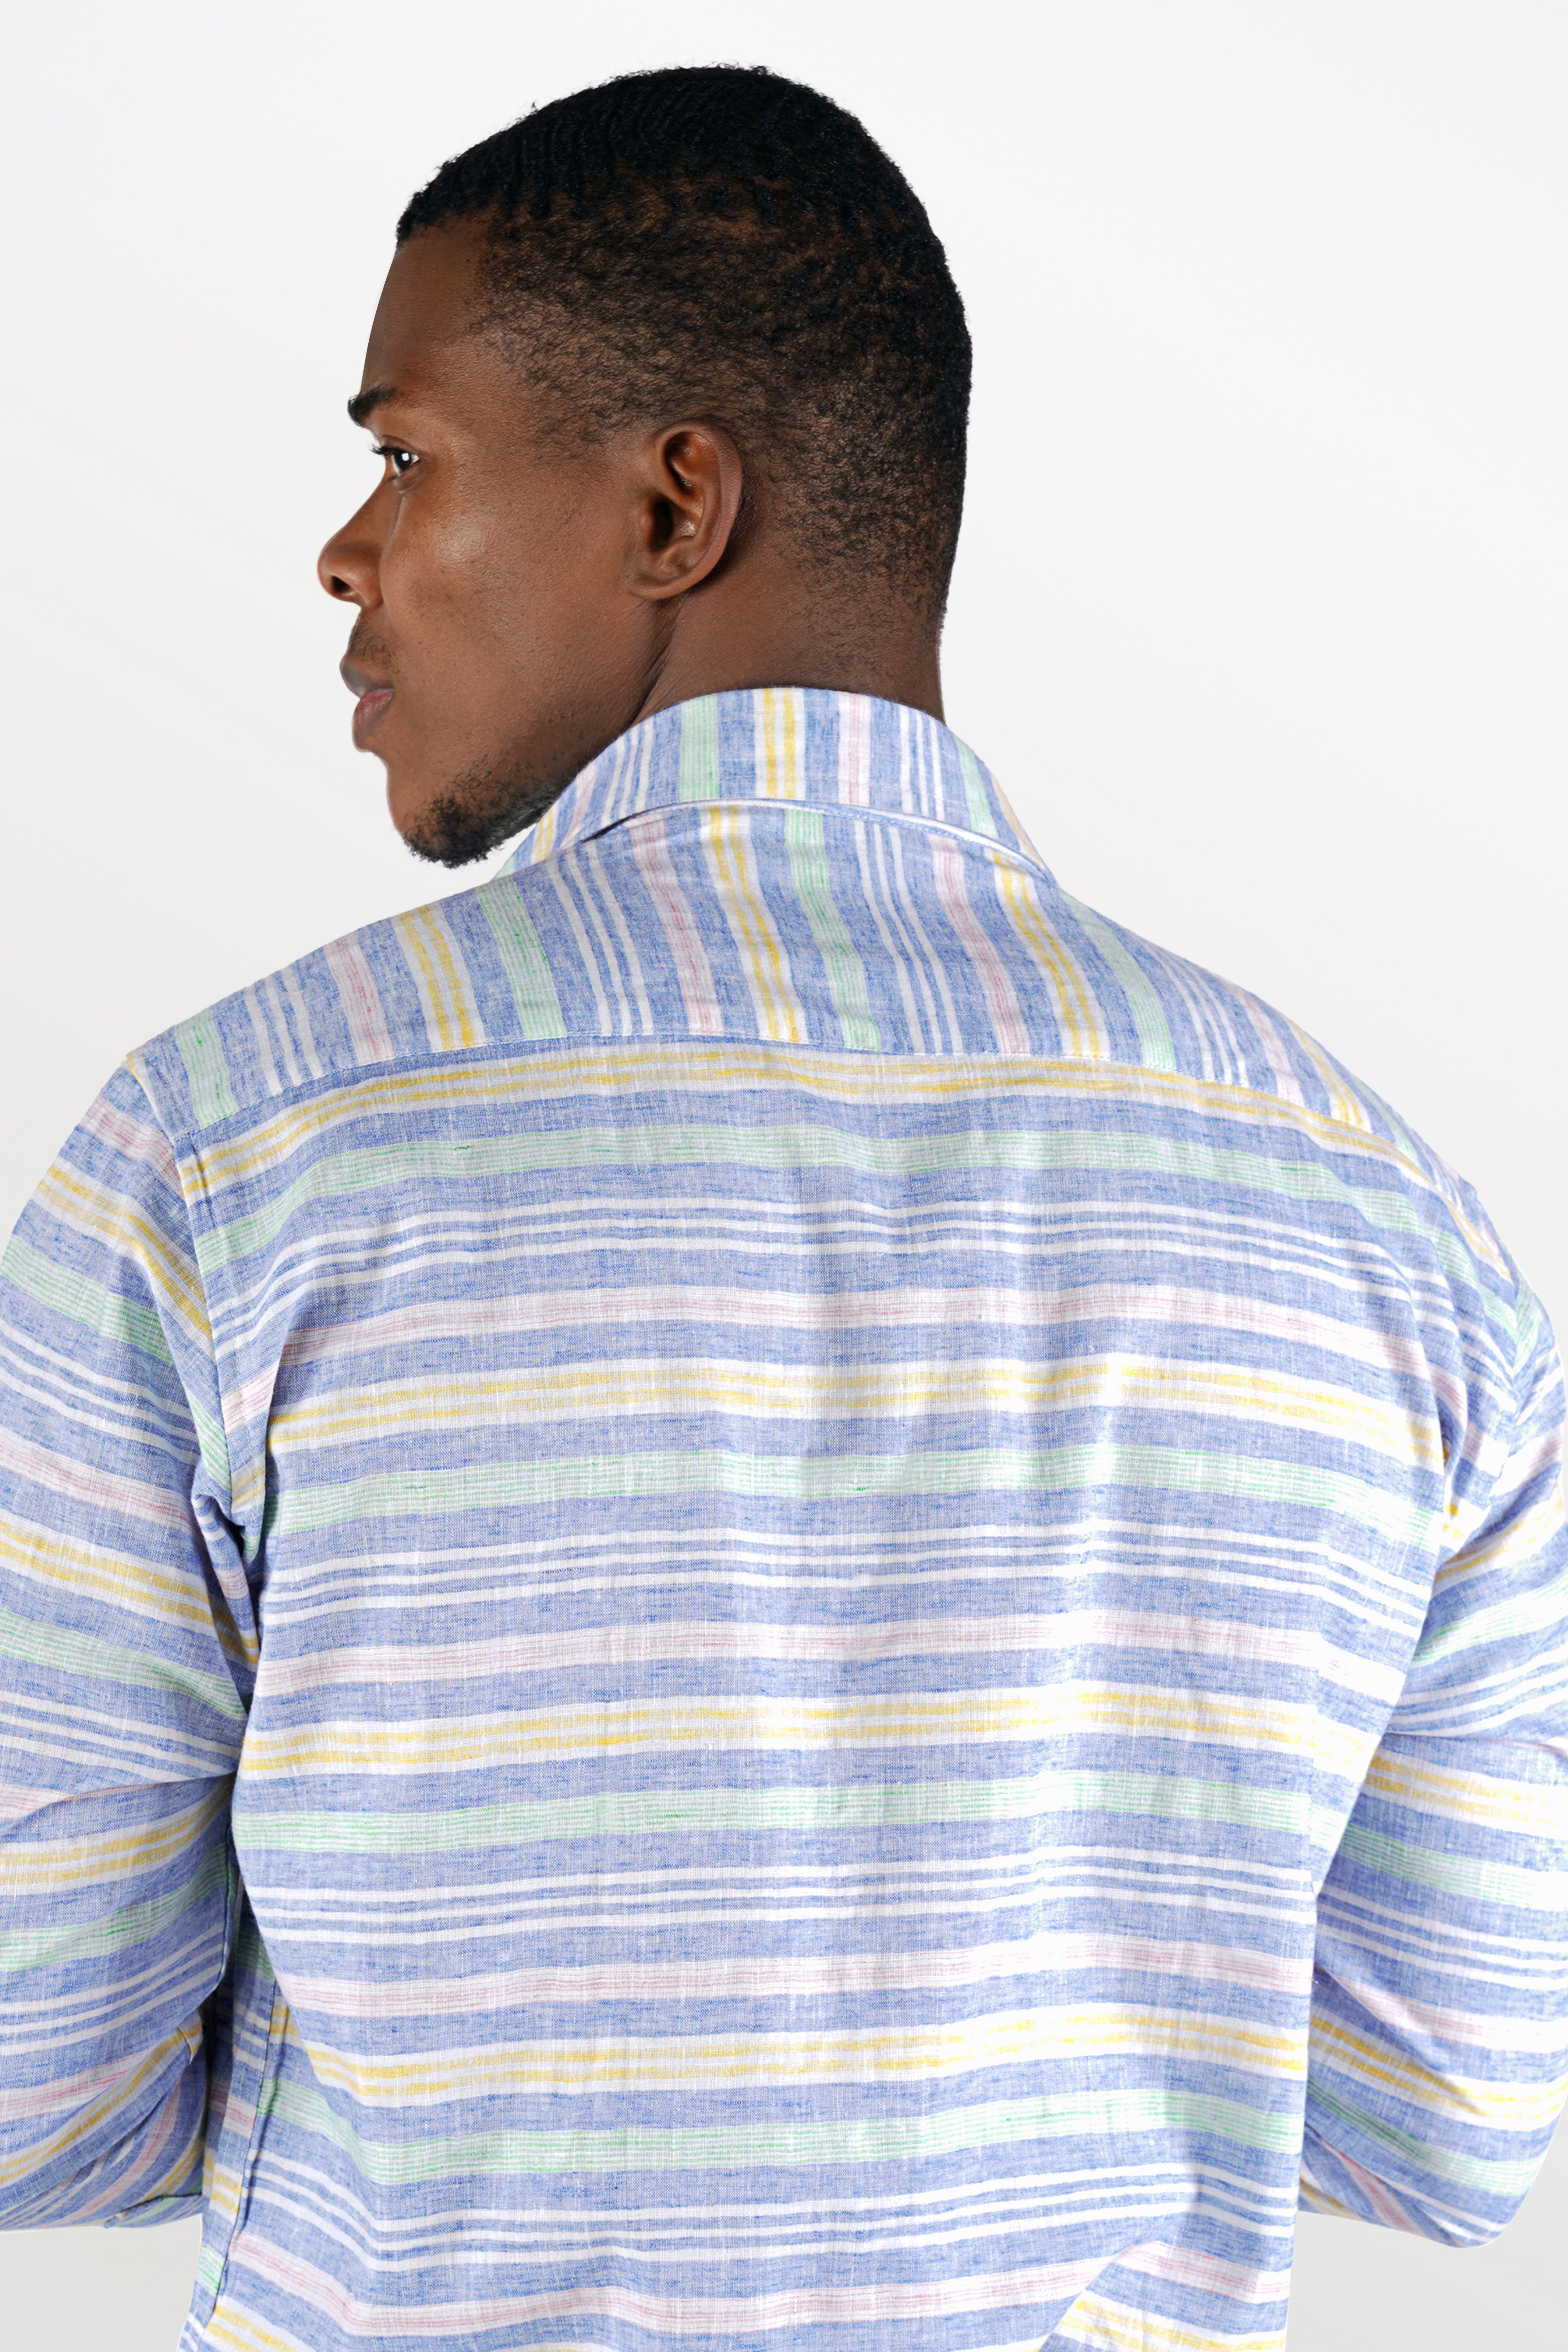 Wistful Blue with Marzipan Yellow Striped Chambray Shirt 10306-CA-BLE-38, 10306-CA-BLE-H-38, 10306-CA-BLE-39, 10306-CA-BLE-H-39, 10306-CA-BLE-40, 10306-CA-BLE-H-40, 10306-CA-BLE-42, 10306-CA-BLE-H-42, 10306-CA-BLE-44, 10306-CA-BLE-H-44, 10306-CA-BLE-46, 10306-CA-BLE-H-46, 10306-CA-BLE-48, 10306-CA-BLE-H-48, 10306-CA-BLE-50, 10306-CA-BLE-H-50, 10306-CA-BLE-52, 10306-CA-BLE-H-52